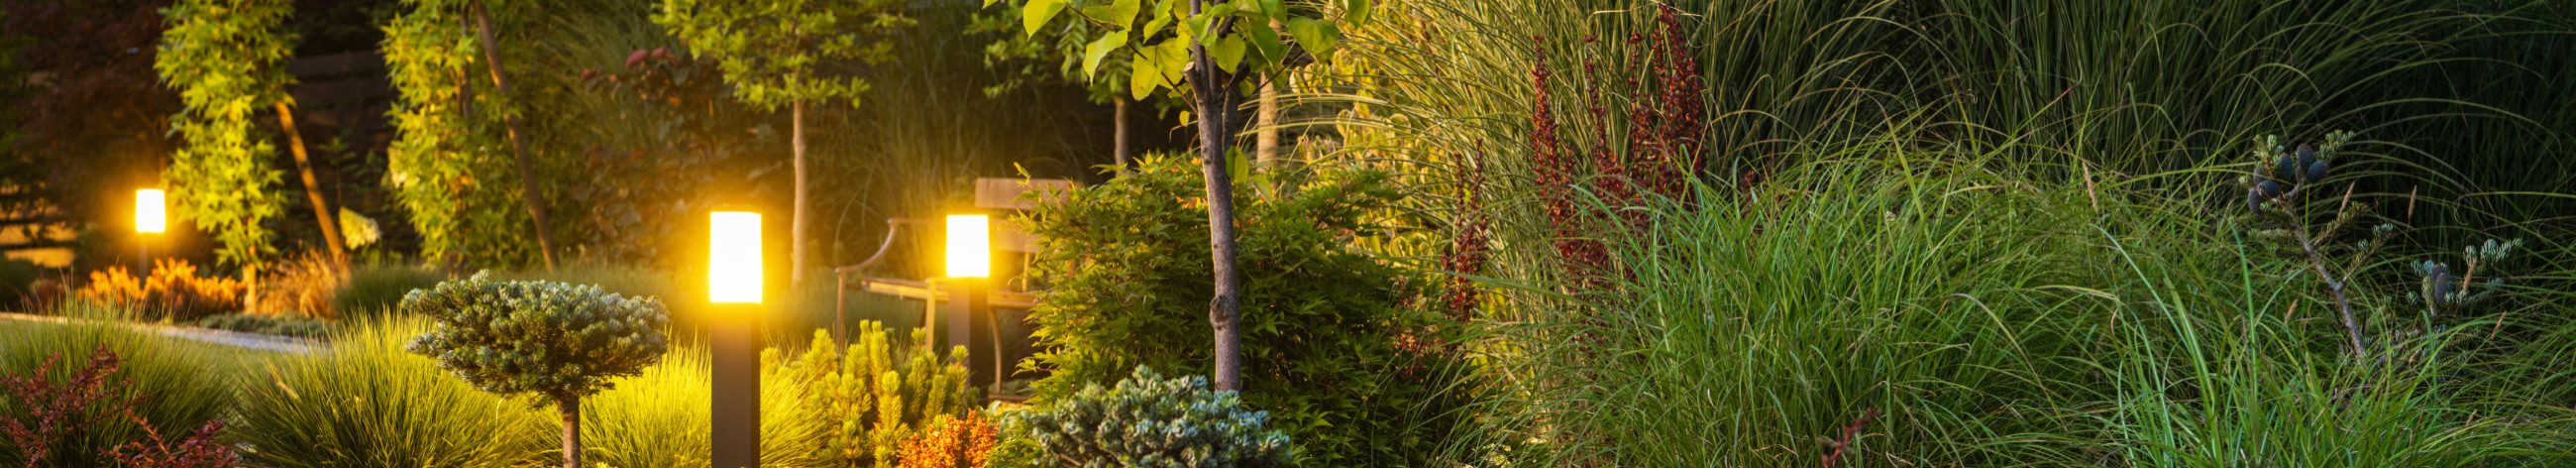 We offer ready-to-use product kits for garden creation, complete with realistic visualizations, detailed planting schemes, and step-by-step instructions.